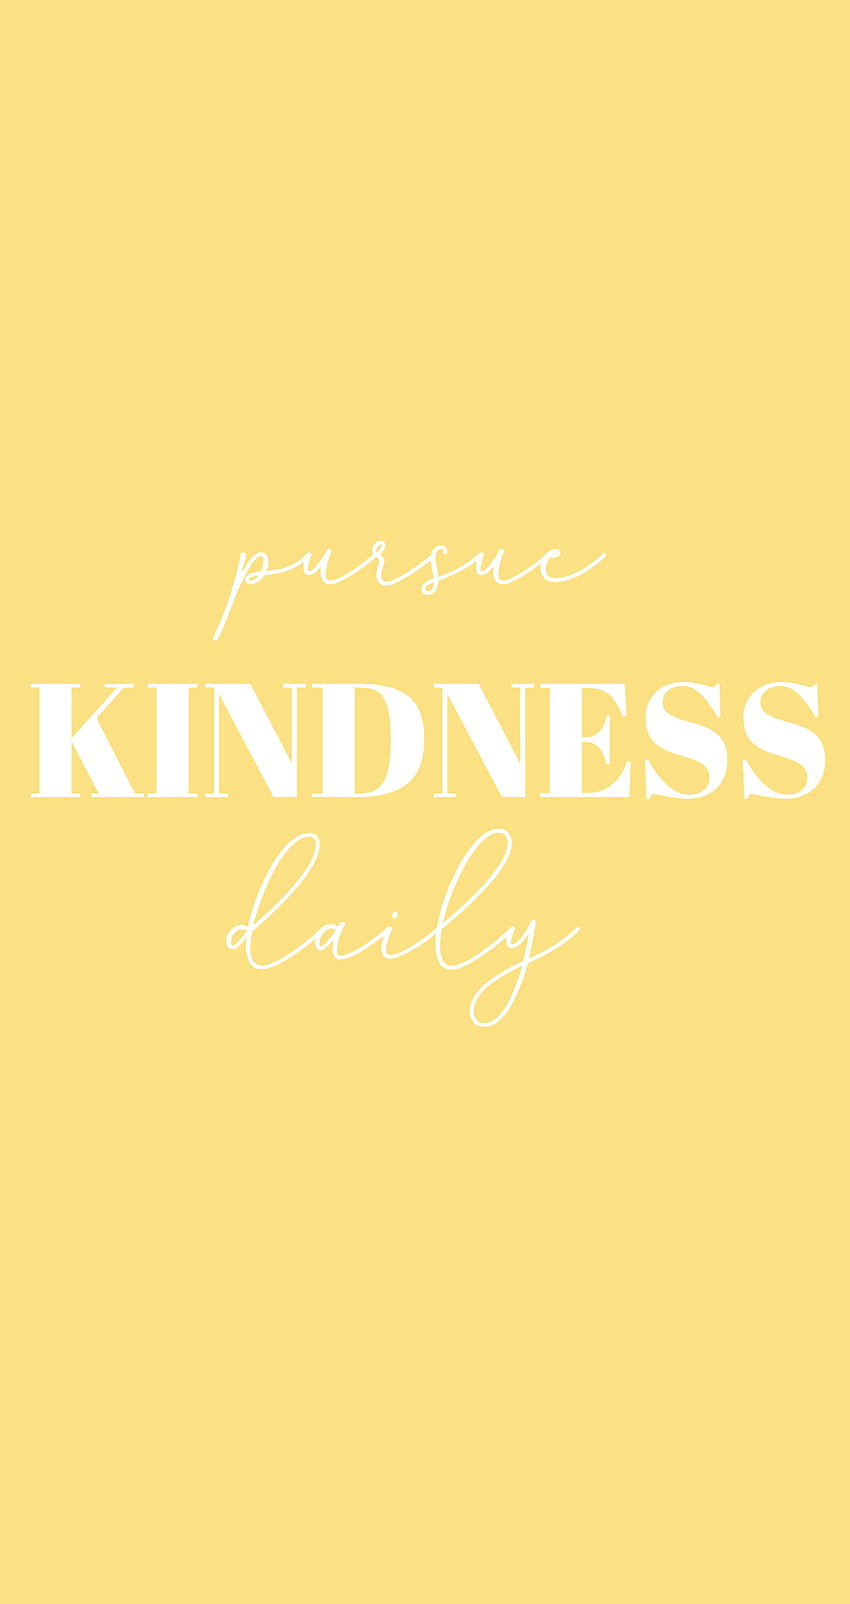 Purse kindness daily yellow quote iphone yellow iphone backgrounds quote wallpap Purs… in 2020, cute kindness HD-Handy-Hintergrundbild